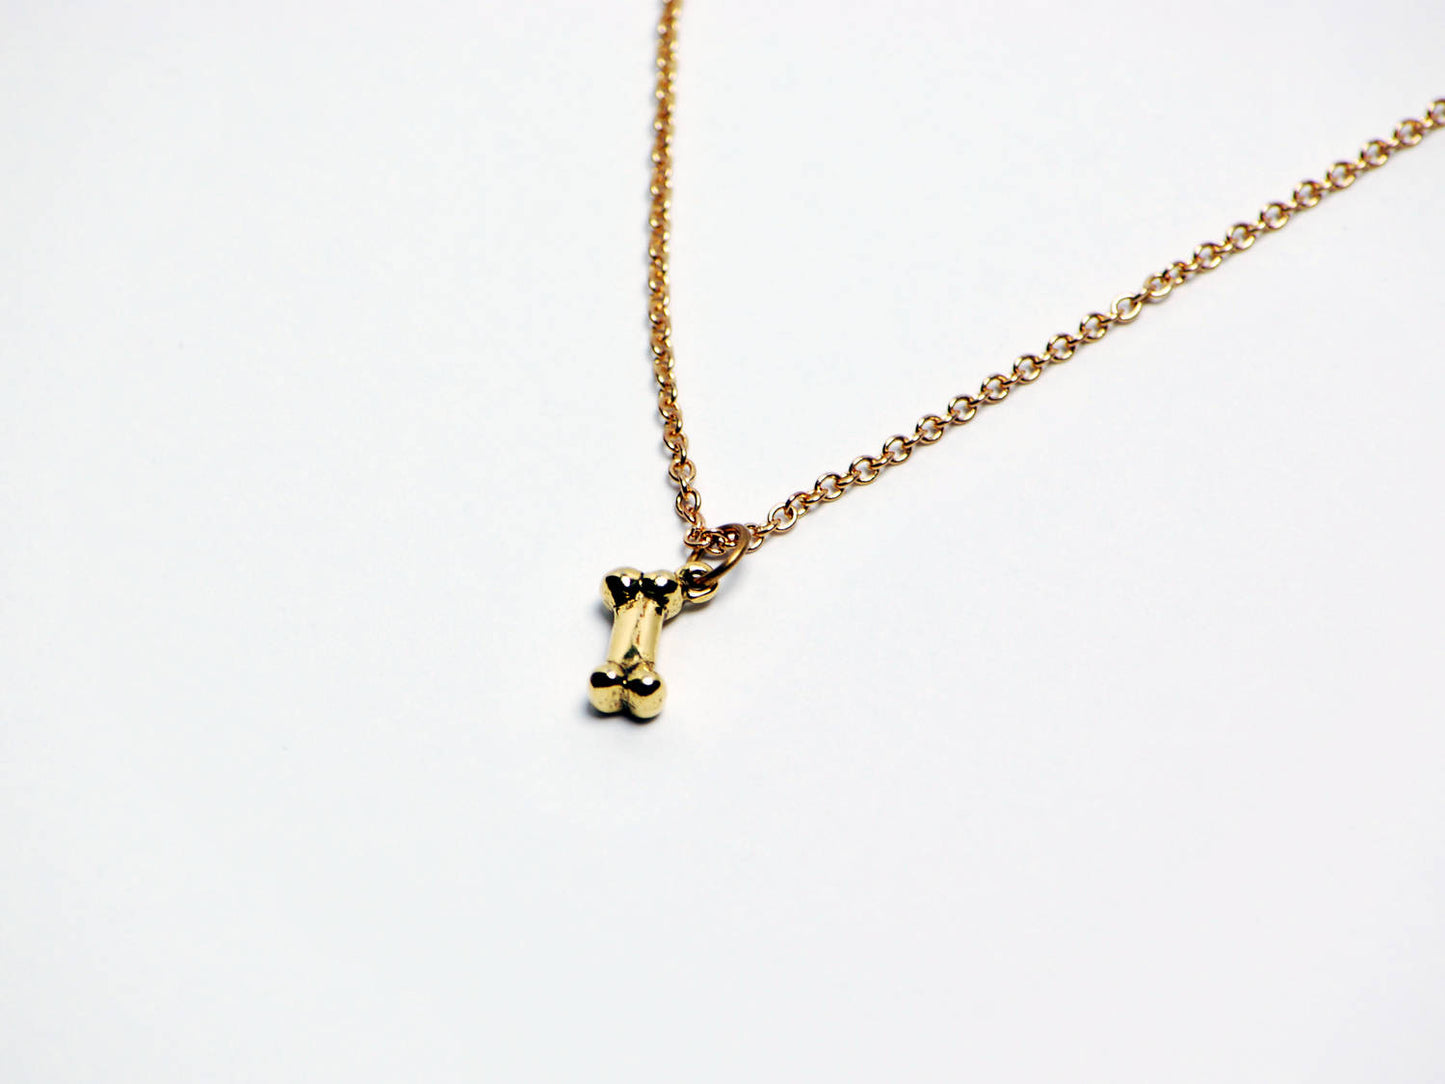 Bone Necklace in Gold